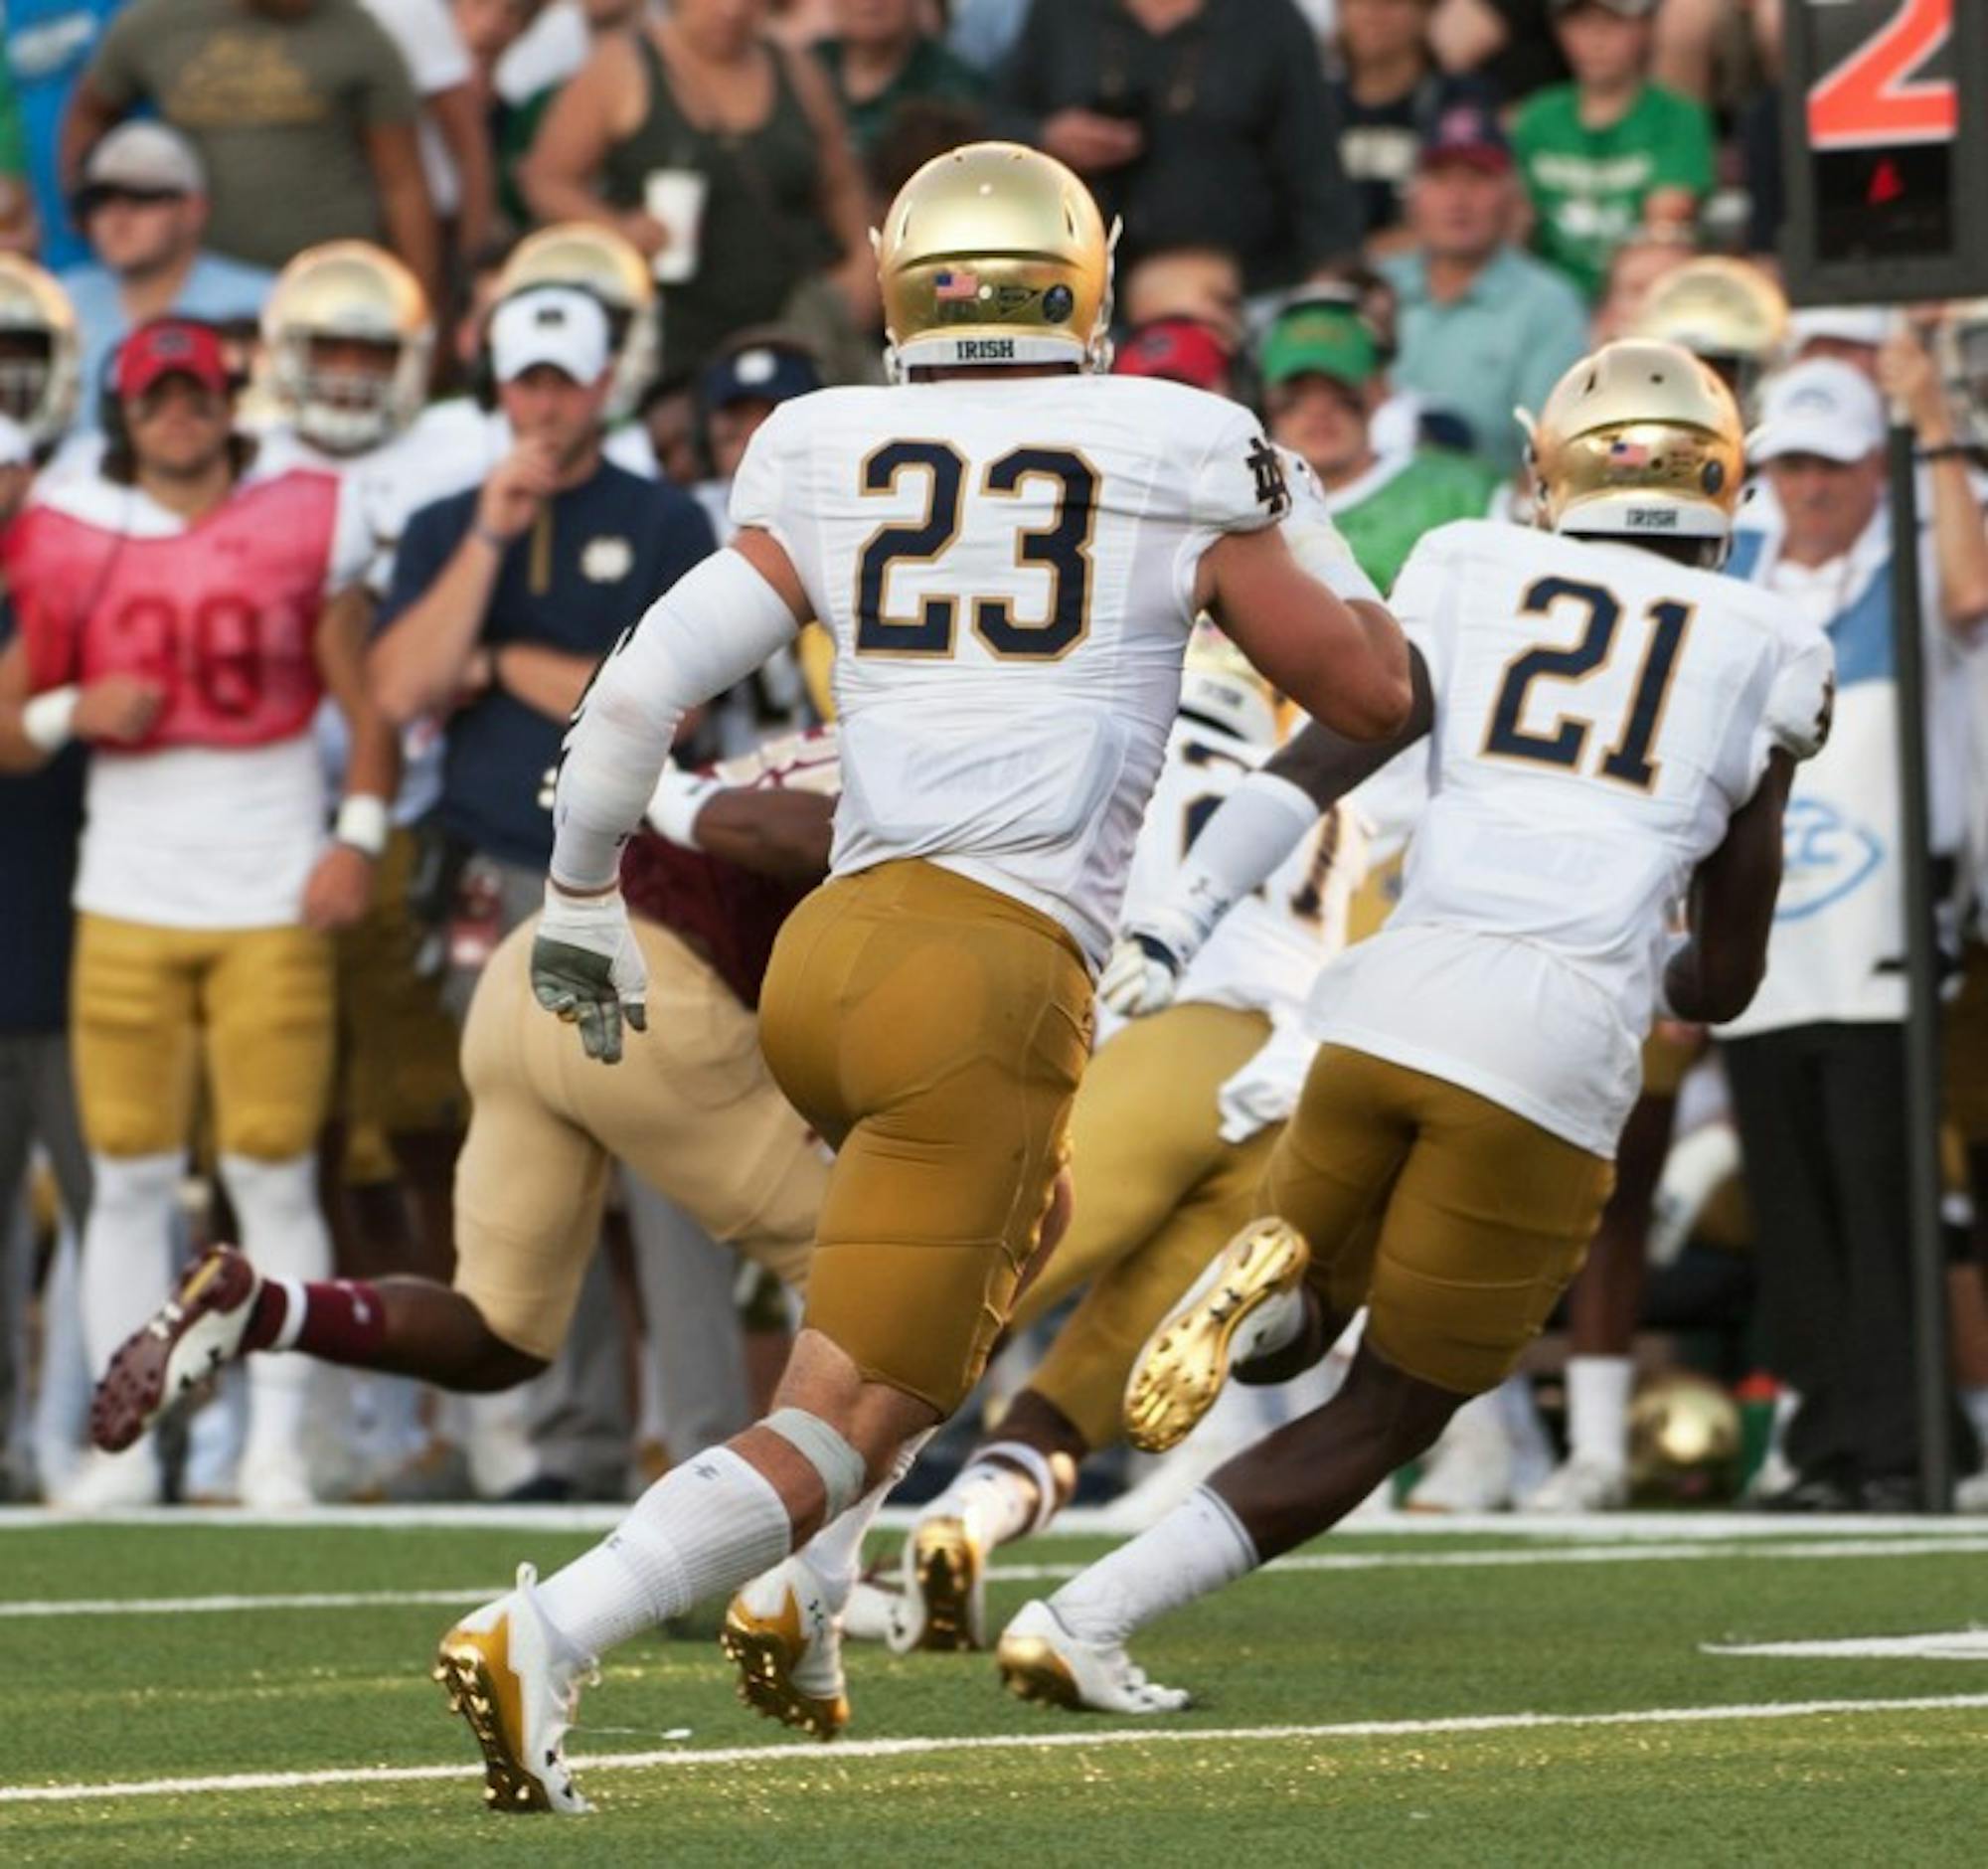 Irish senior linebacker Drue Tranquill chases down the opponent during Notre Dame’s 49-20 win over Boston College on Saturday at Alumni Stadium.  Tranquill had four tackles against the Eagles.